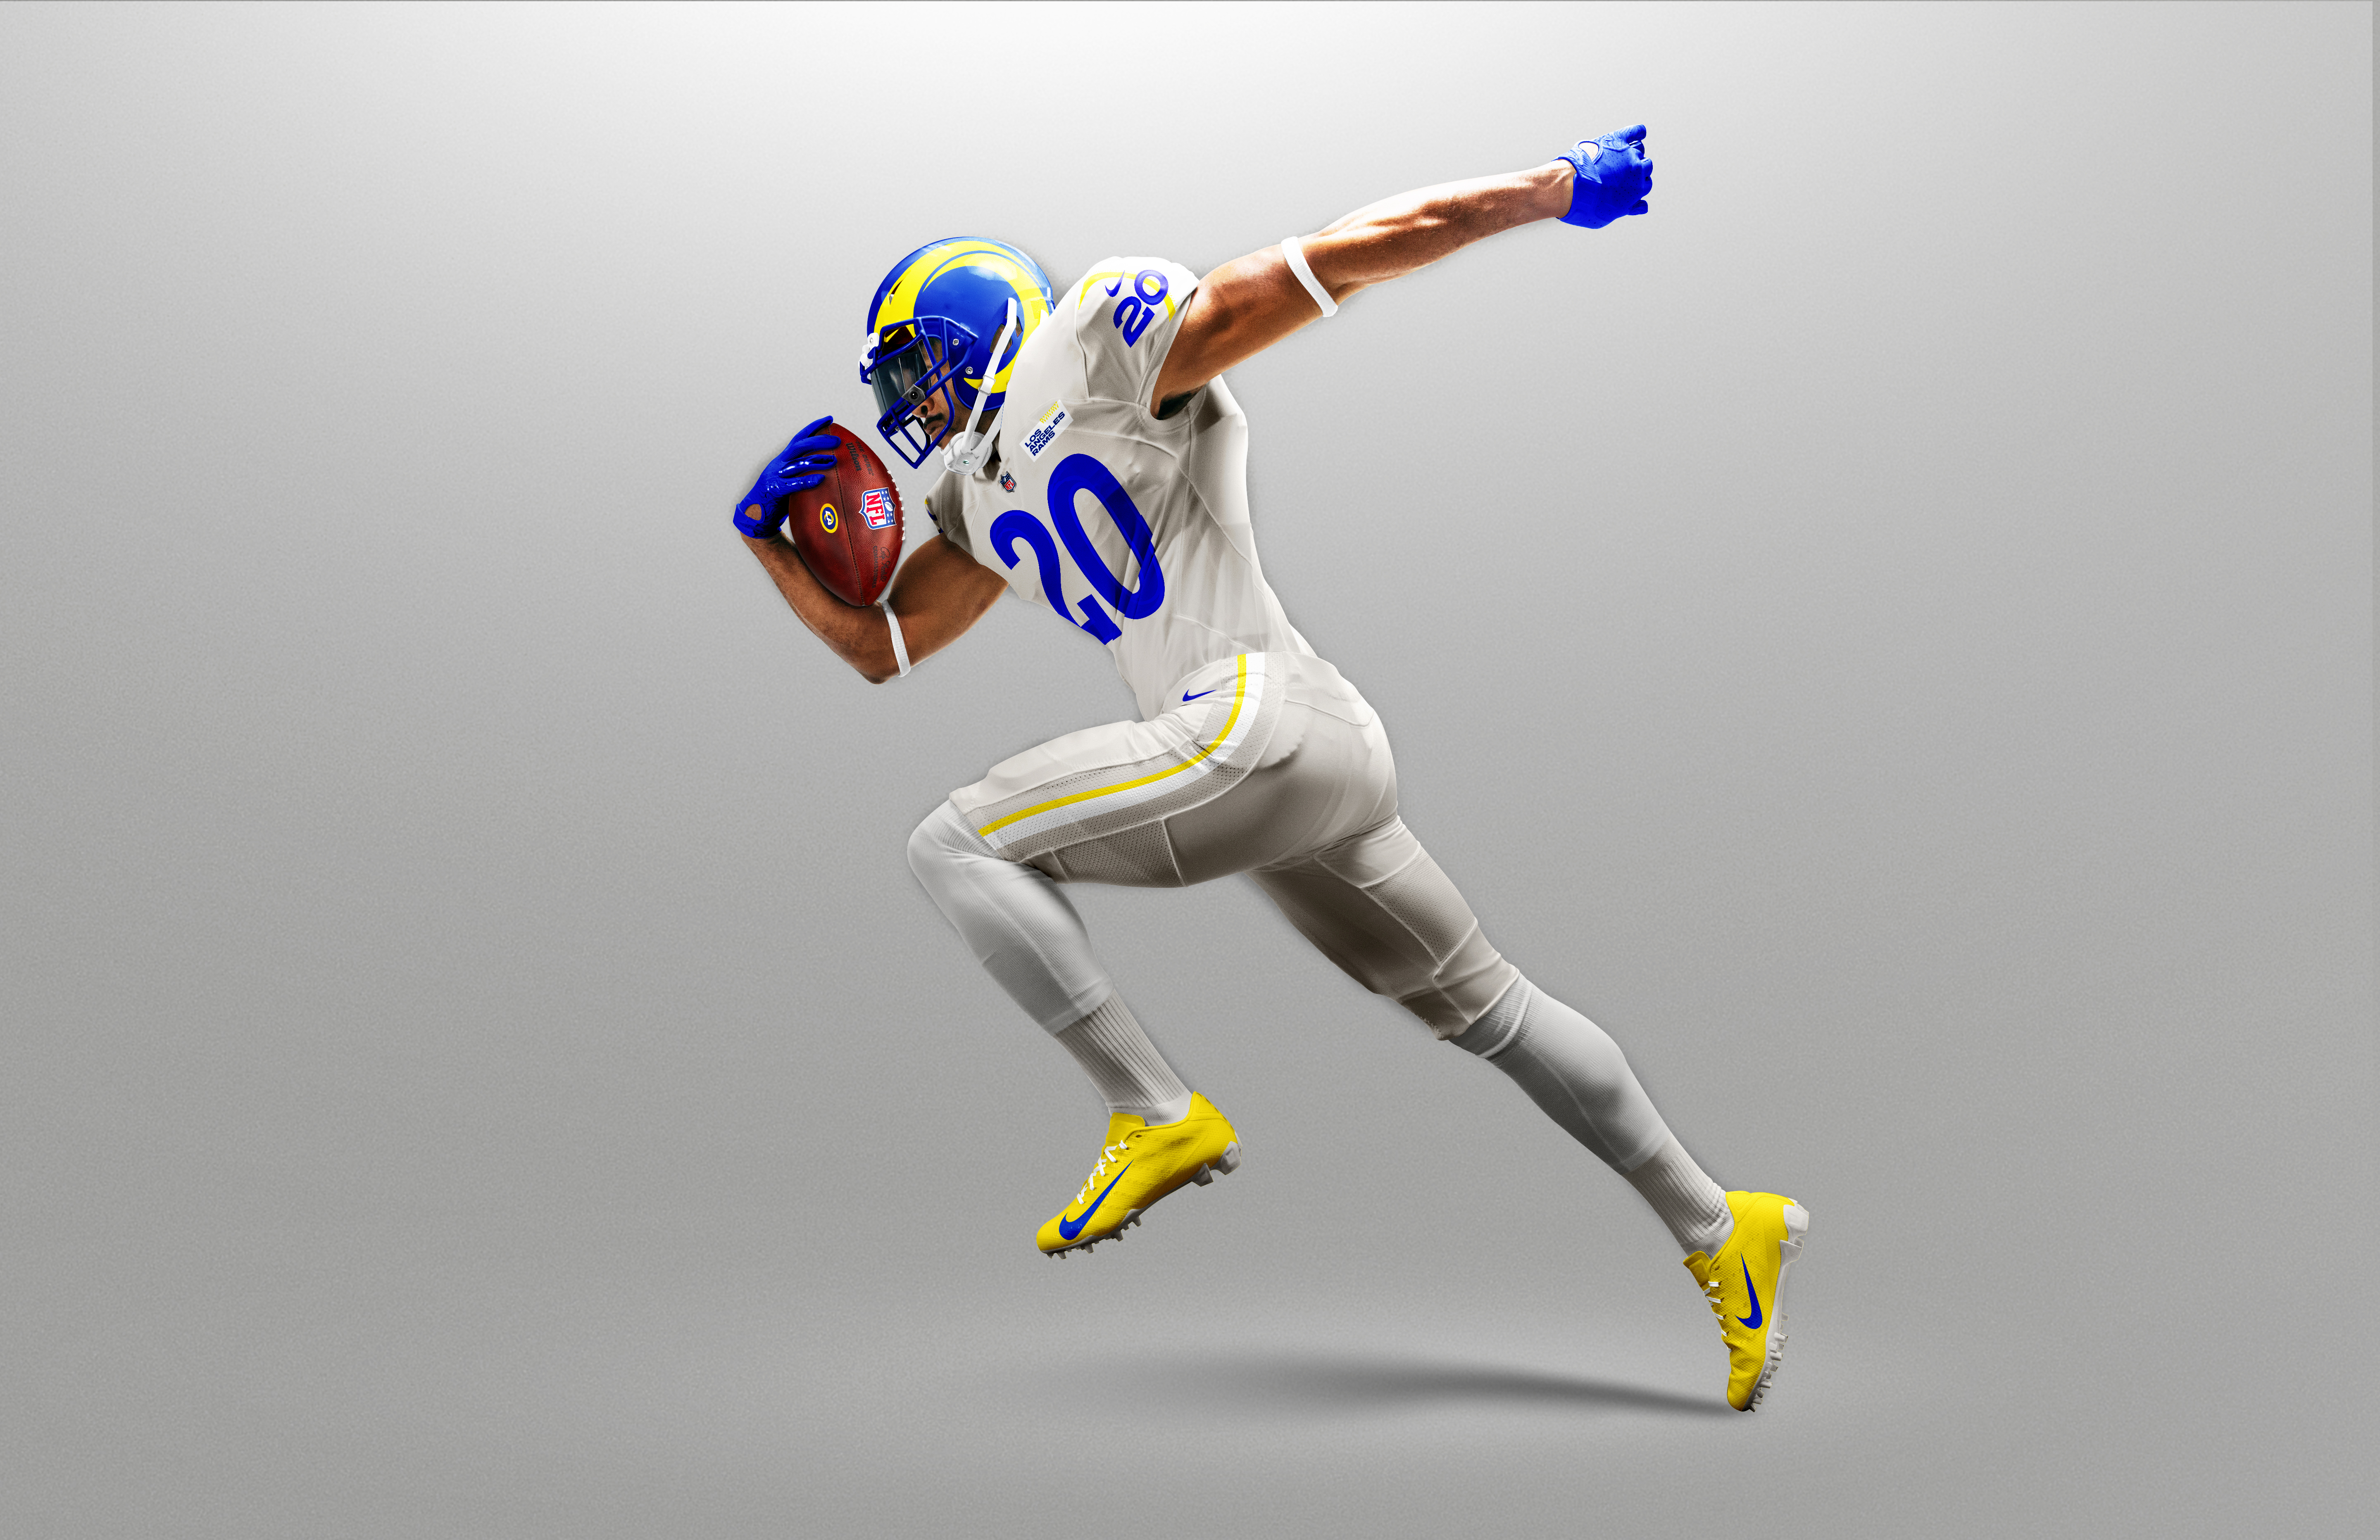 Rams uniforms: Are they quietly moving away from Bone?